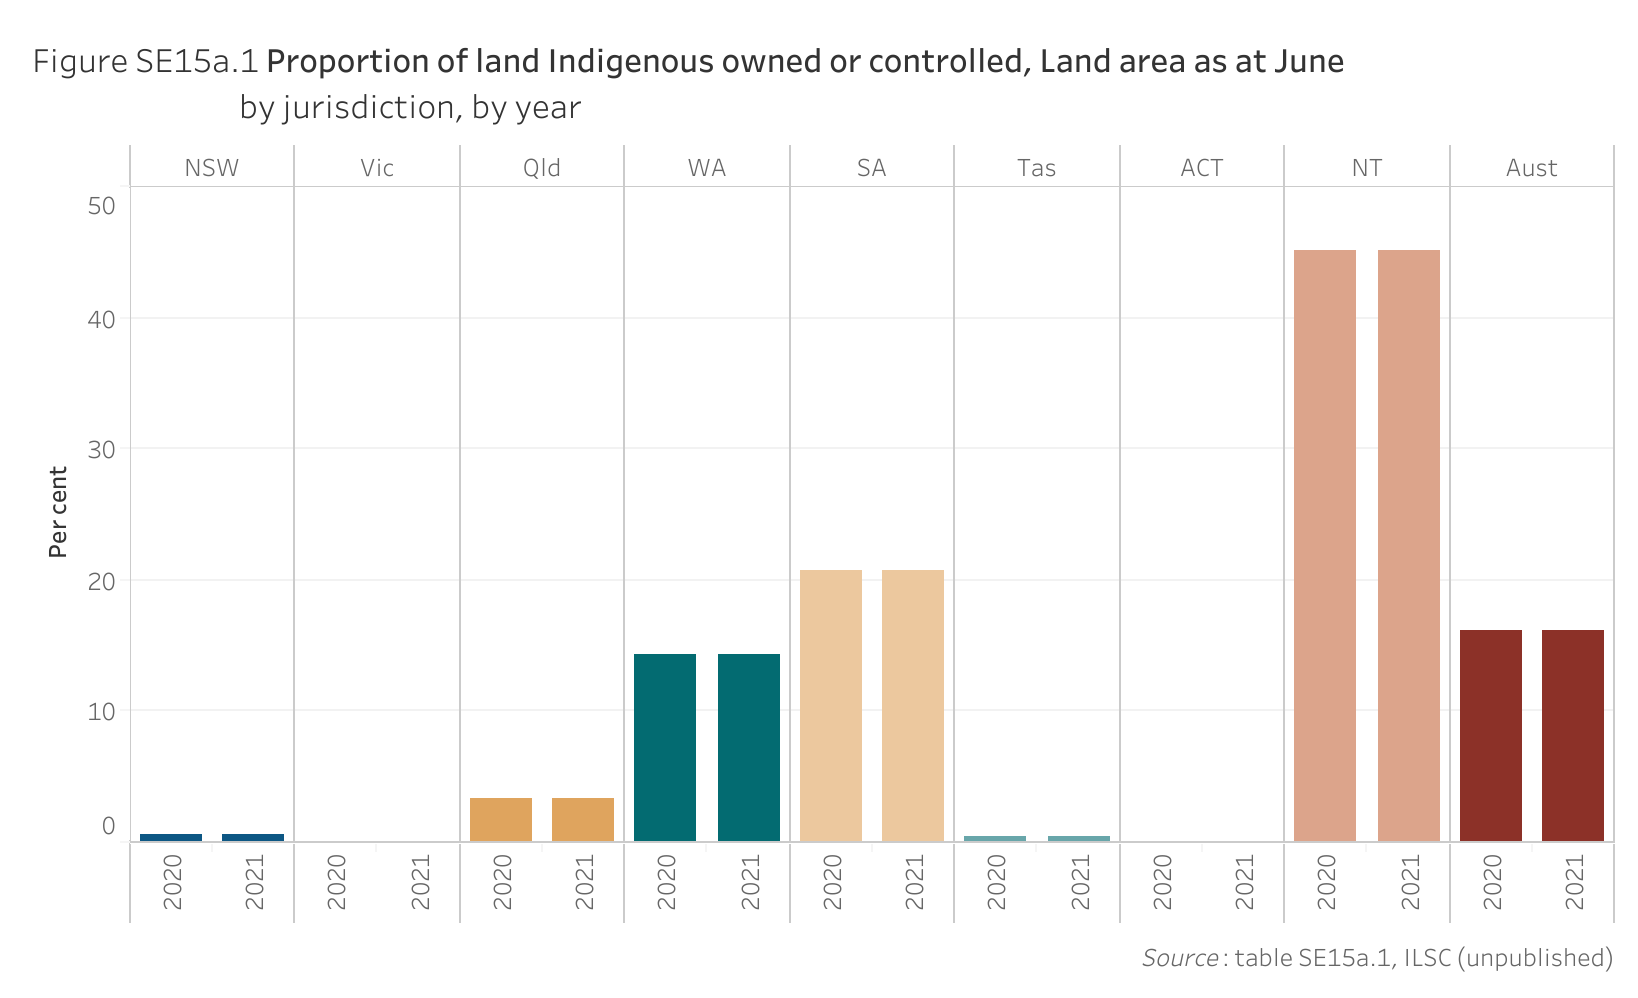 Figure SE15a.1. Bar chart showing the proportion of land area that is Indigenous owned or controlled as at June, by jurisdiction and by year. Data table of figure SE15a.1 is below.